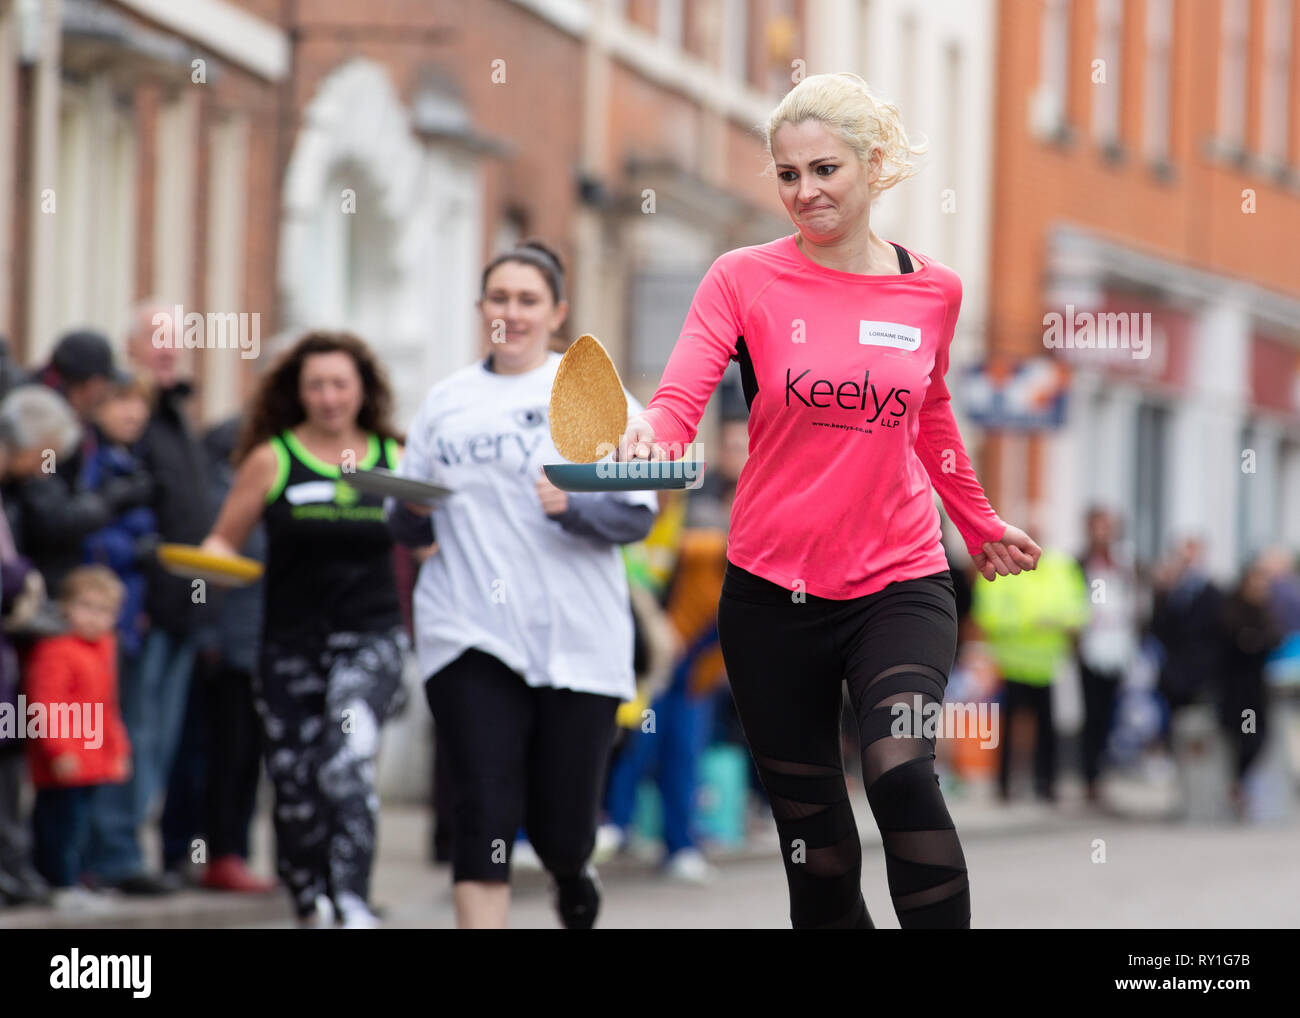 The annual Shrove Tuesday pancake race taking place in Bore Street, Lichfield, England, UK Stock Photo